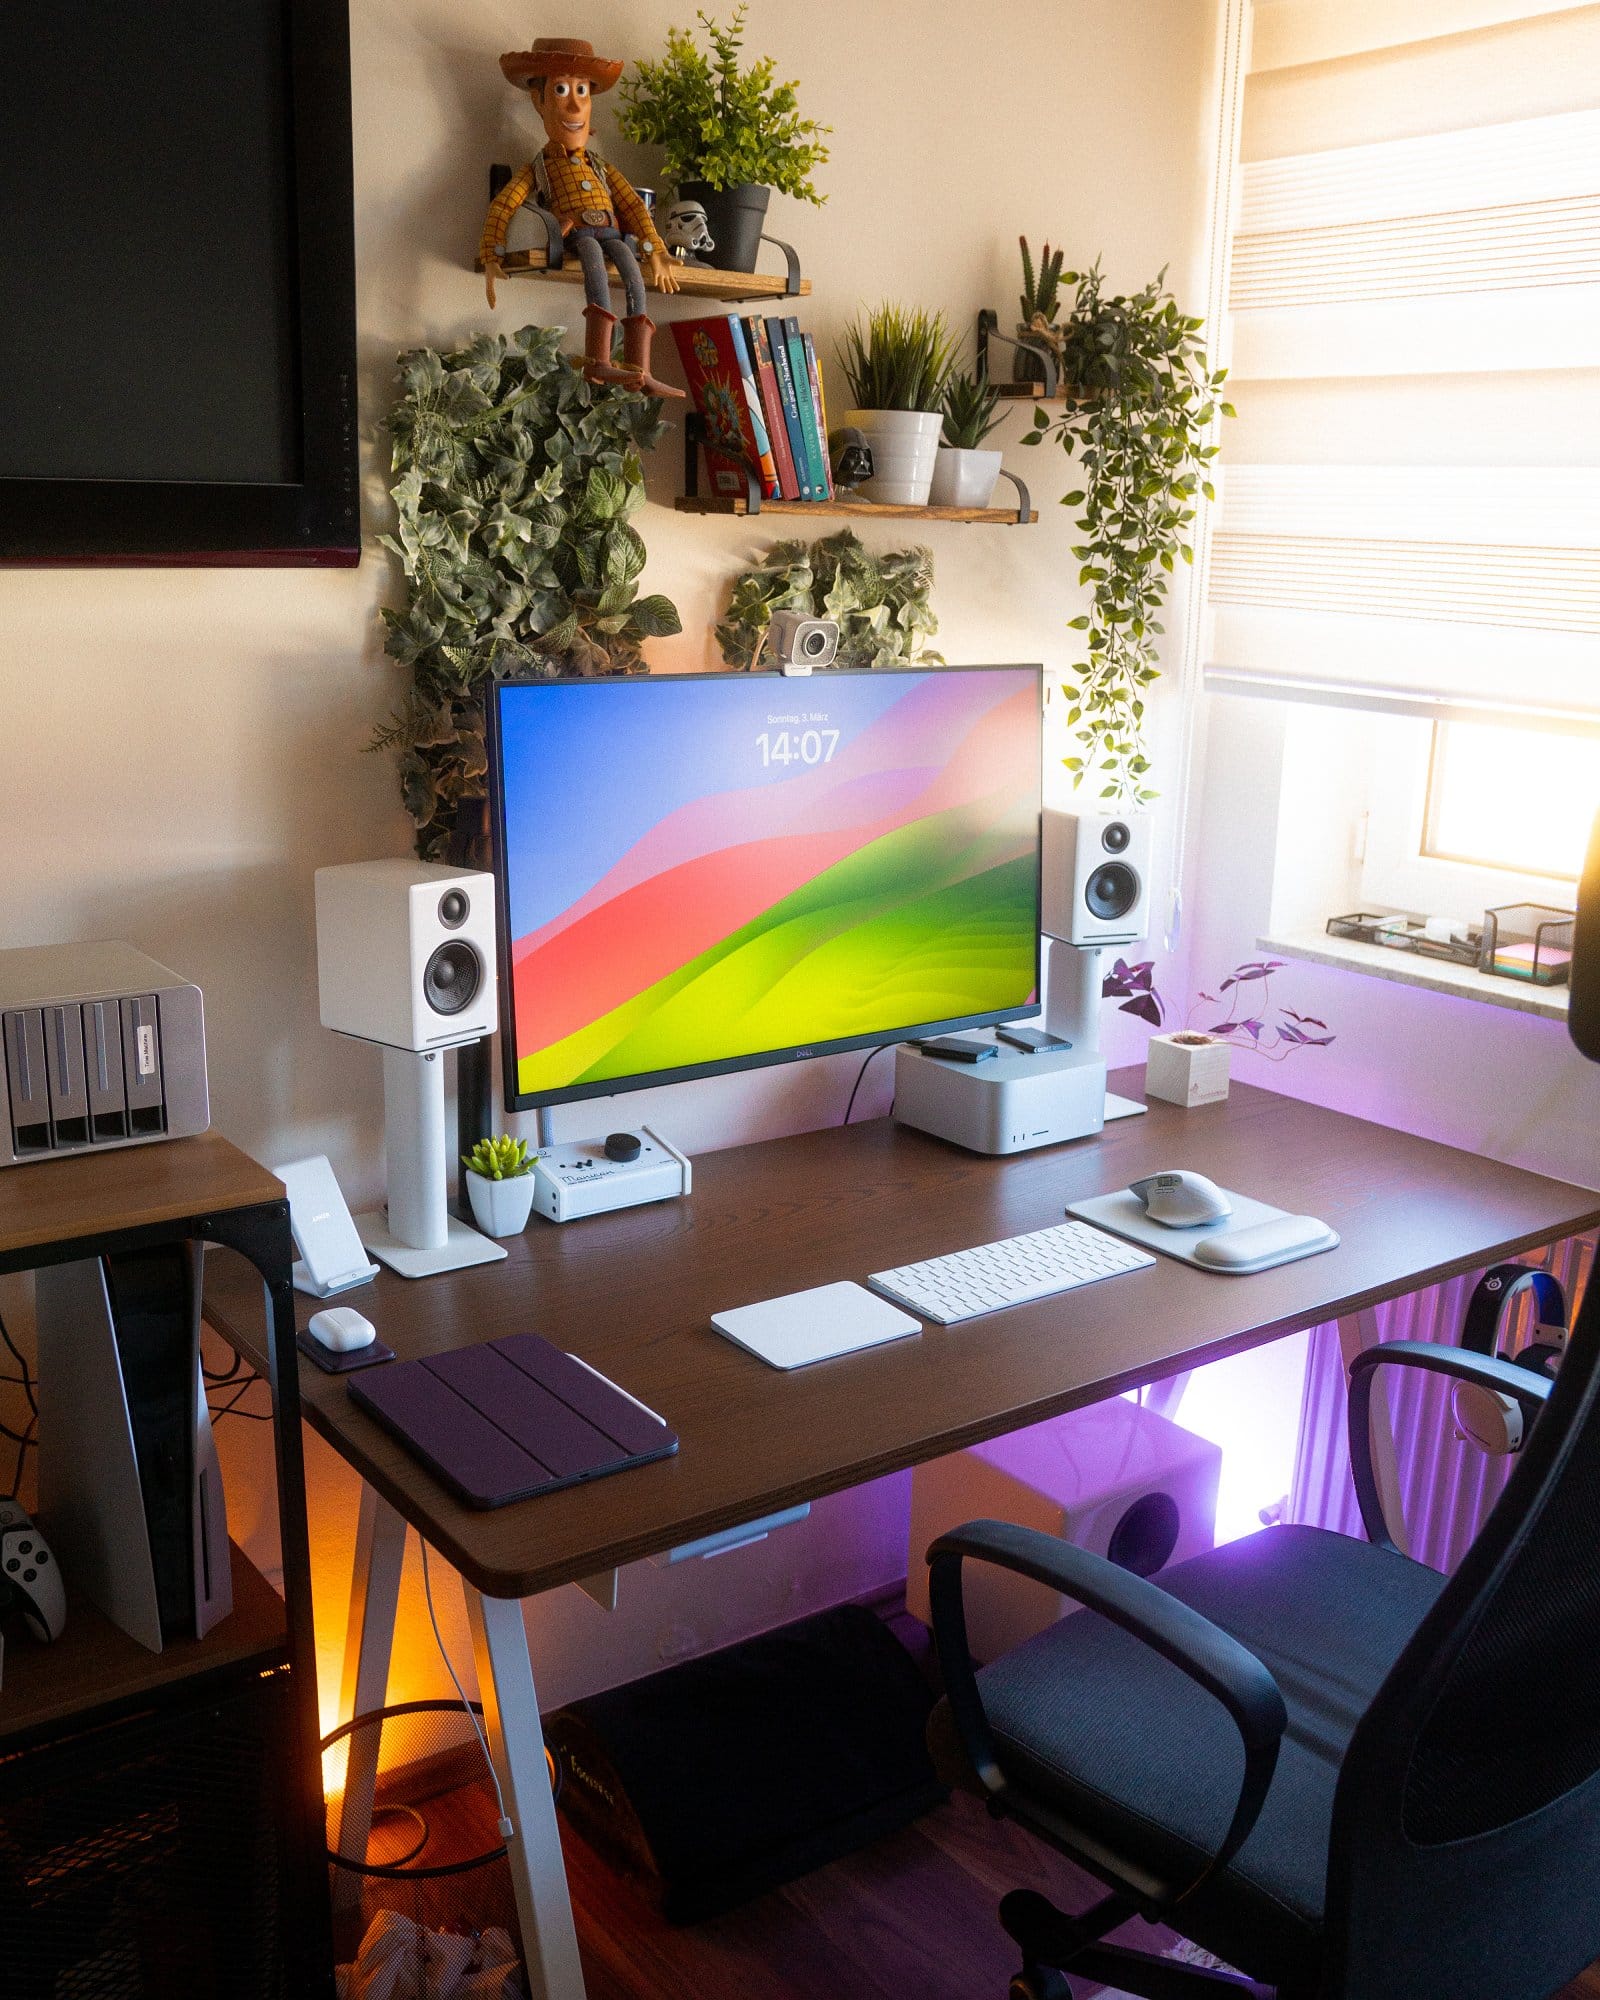 An inviting home office space with a vibrant monitor on a desk, surrounded by tech gadgets, a game console, speakers, and greenery, all under a warm light